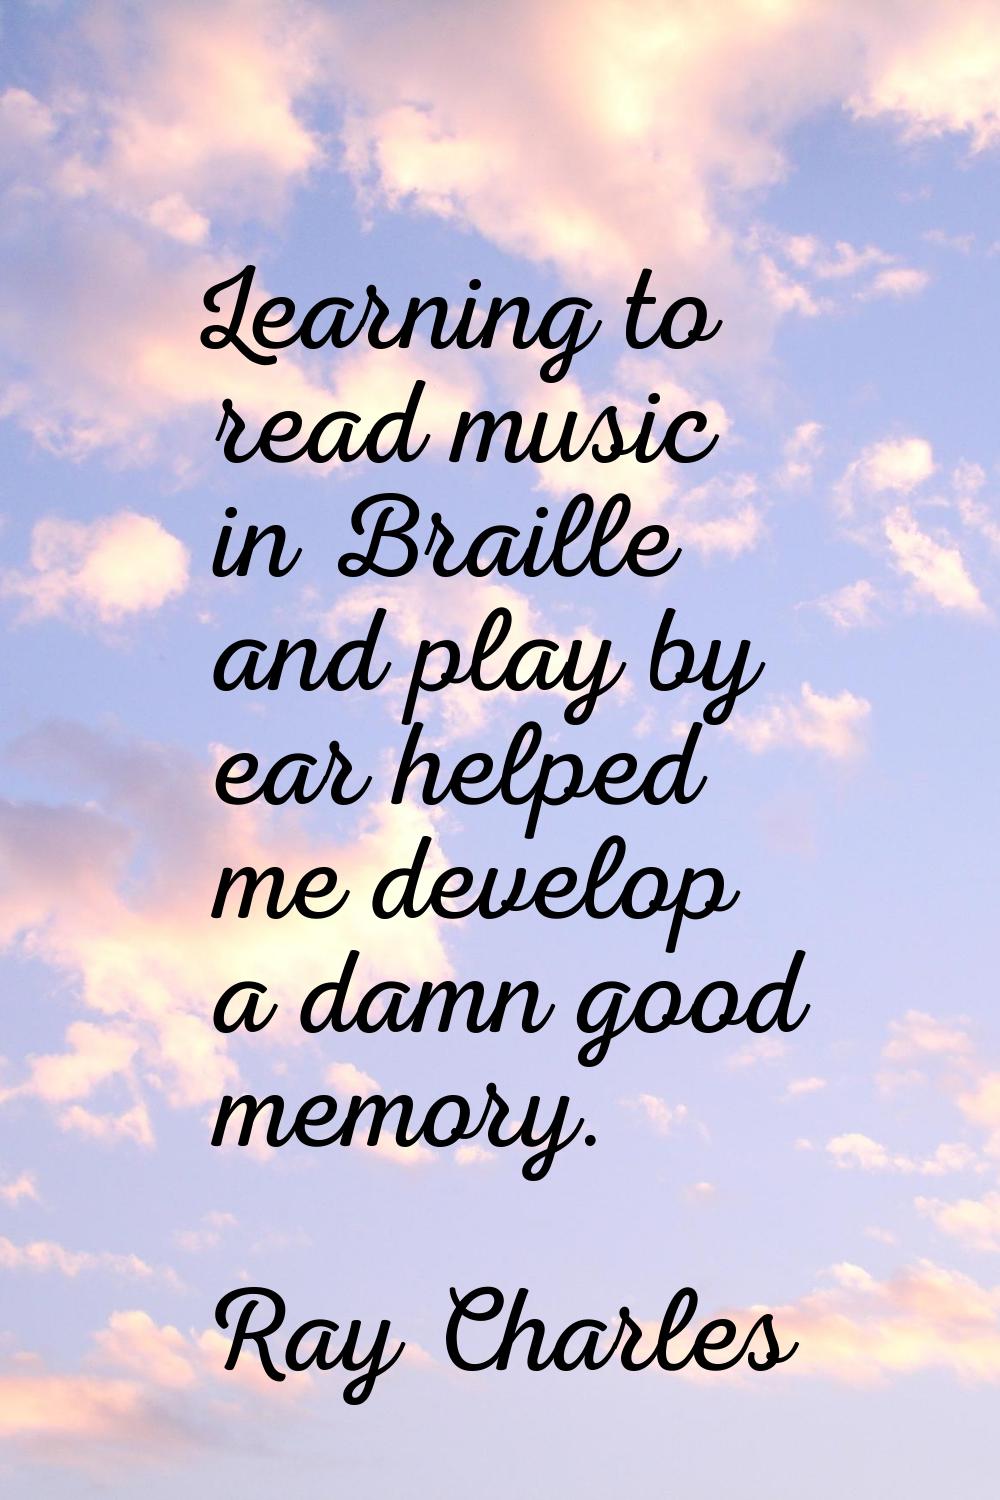 Learning to read music in Braille and play by ear helped me develop a damn good memory.